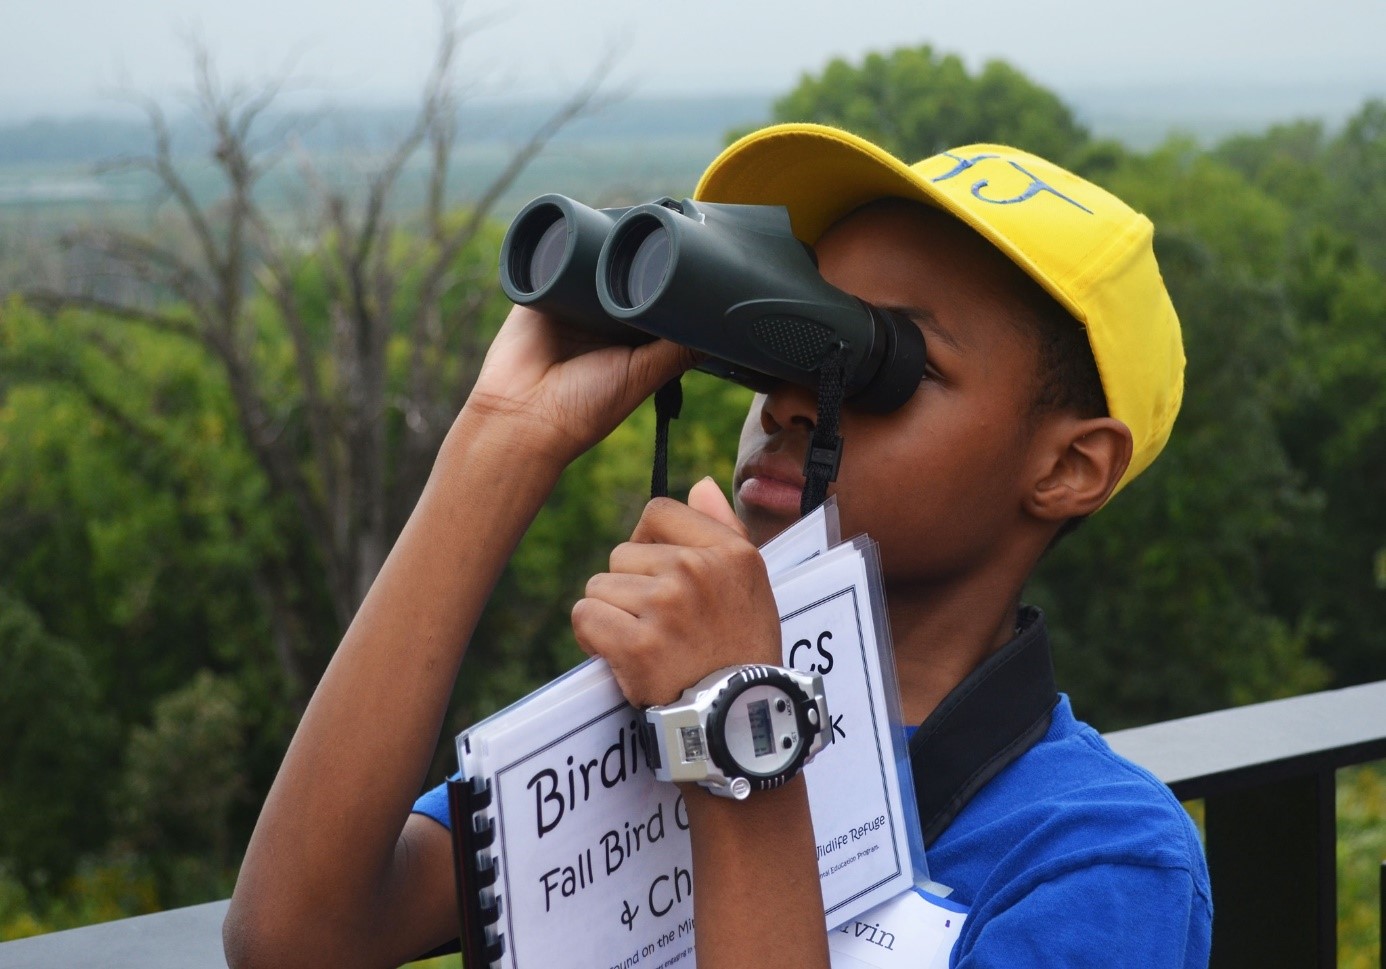 Child with binoculars, wearing a yellow hat and holding a book about birds.